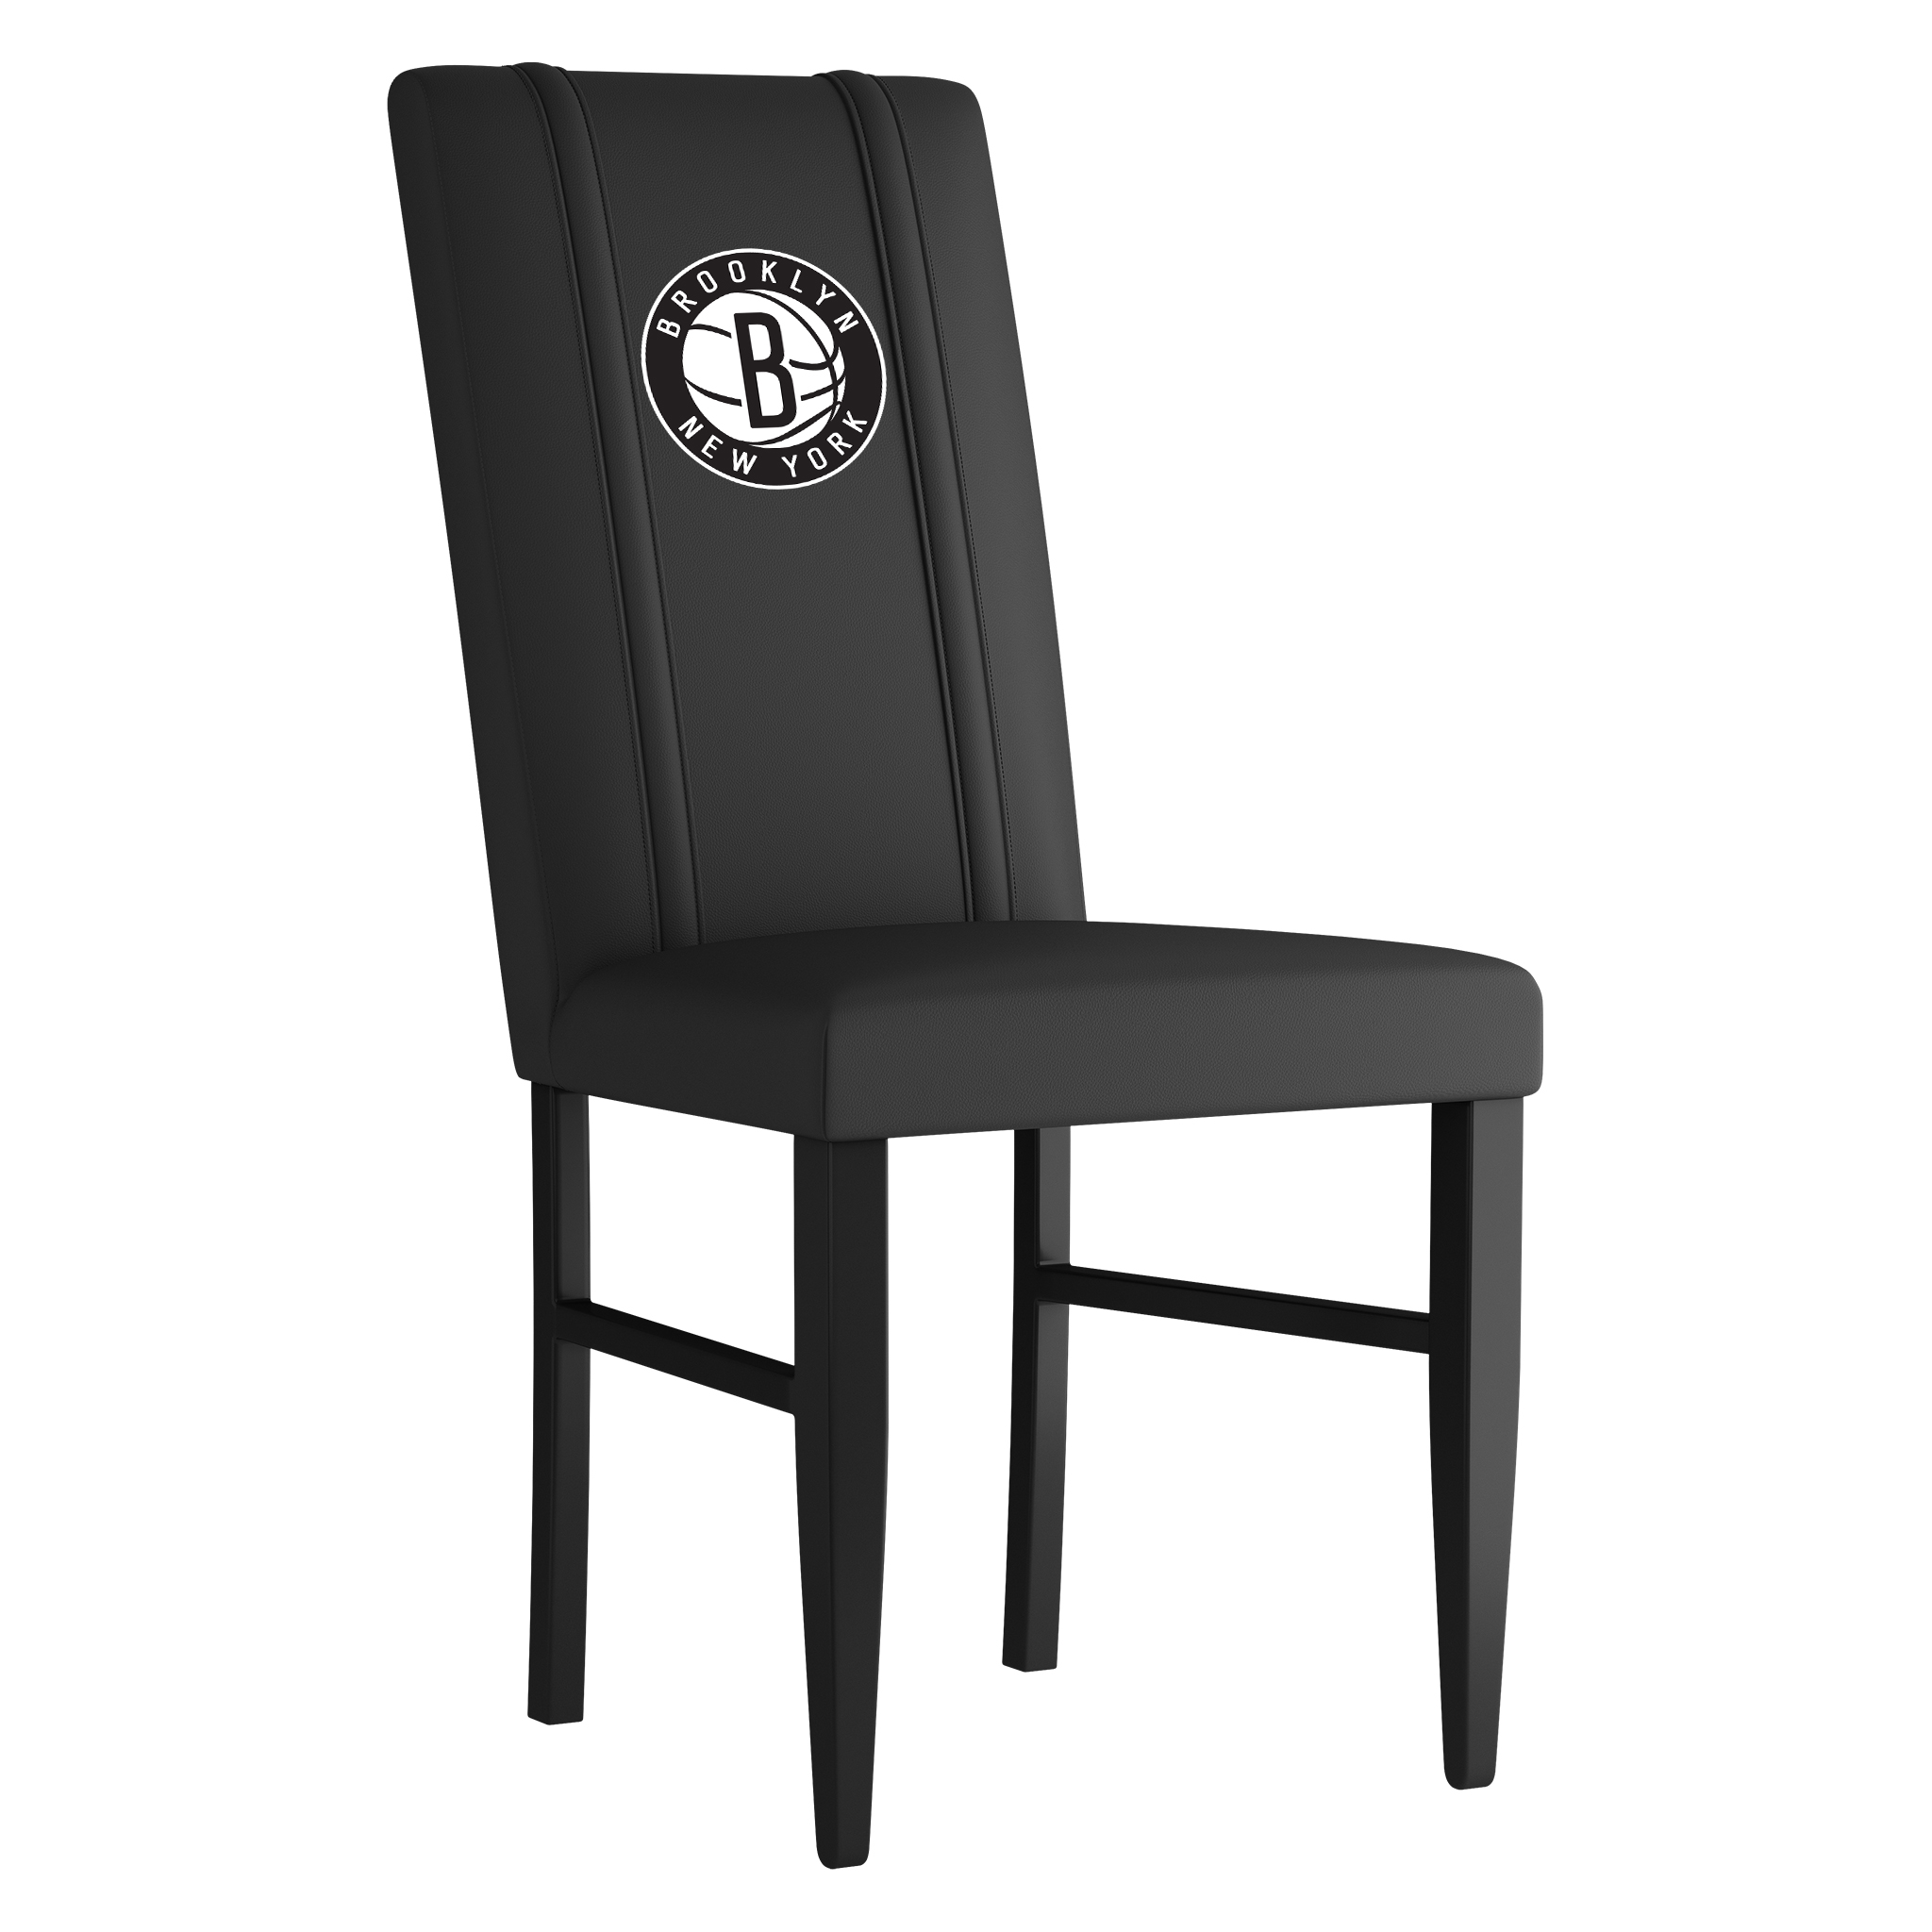 Brooklyn Nets Side Chair 2000 With Brooklyn Nets Secondary